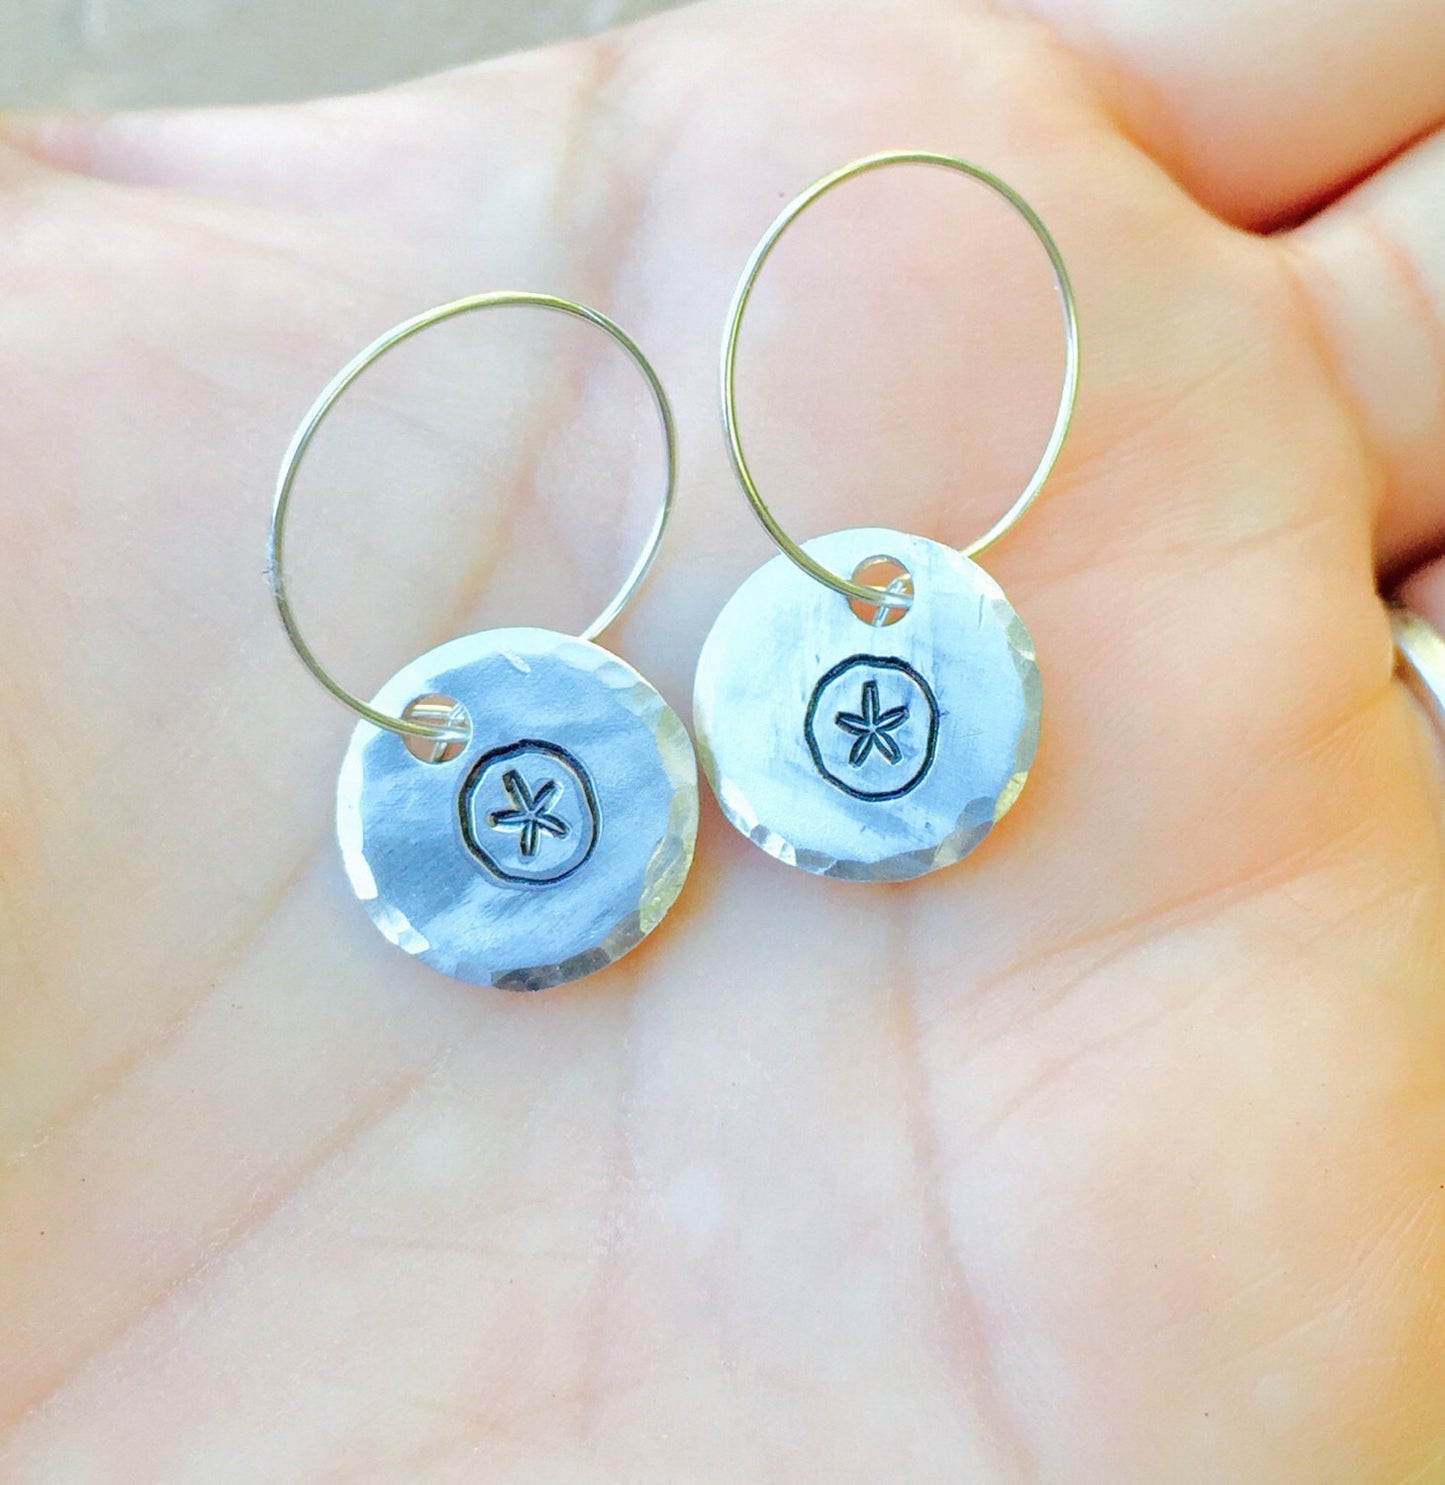 Sand Dollar Earrings, Turtle Earrings, Pineapple Earrings, Hawaiian Earrings, natashaaloha - Natashaaloha, jewelry, bracelets, necklace, keychains, fishing lures, gifts for men, charms, personalized, 